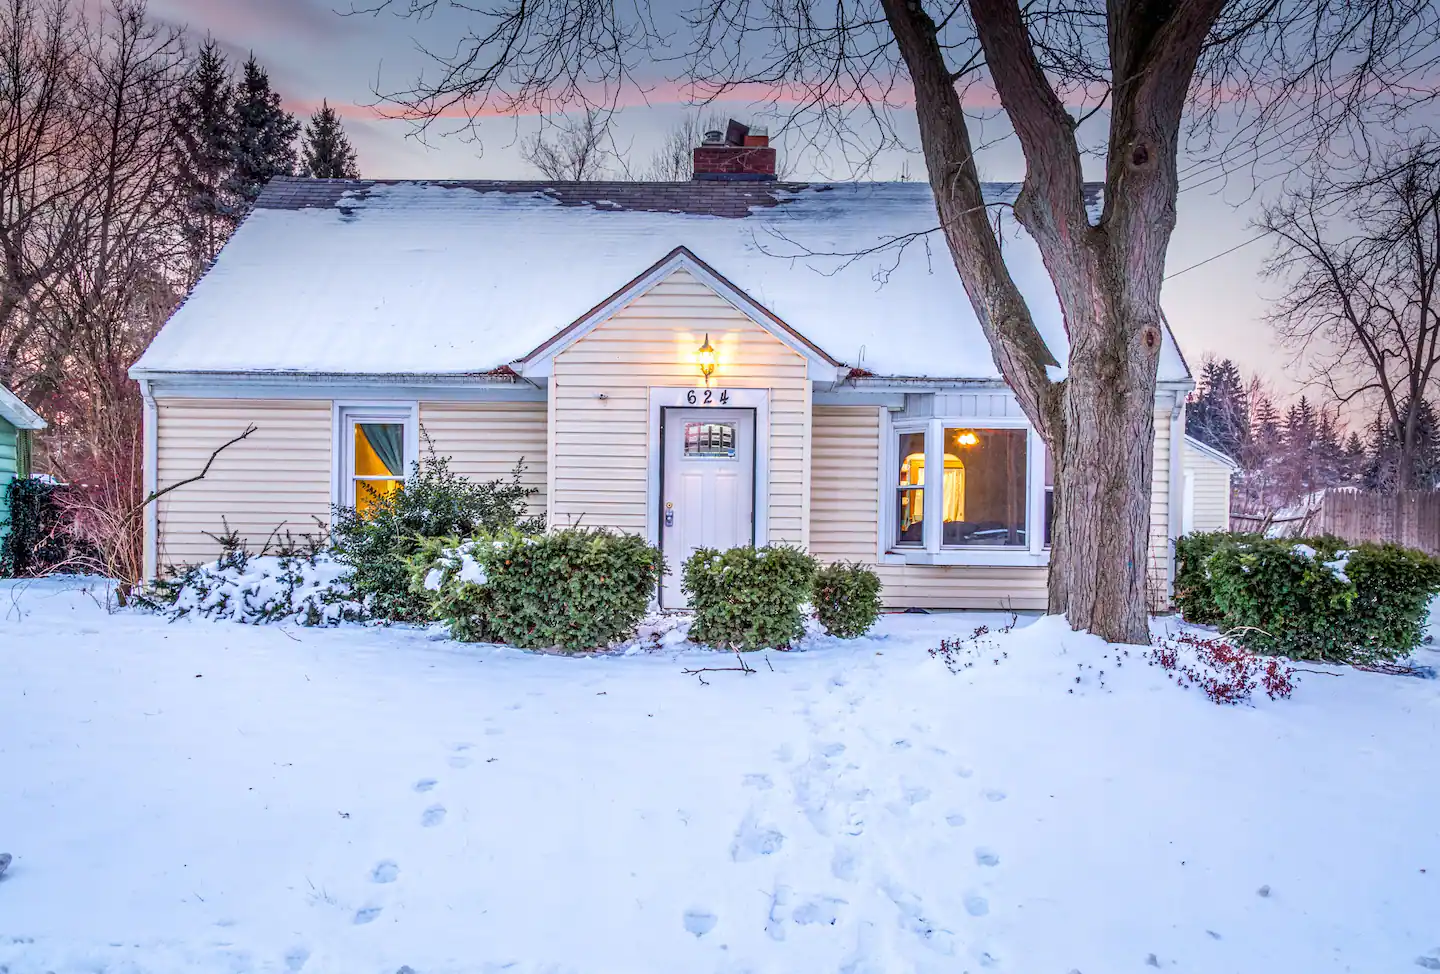 Cool, Calm & Cozy Home - one of the best airbnbs in Michigan